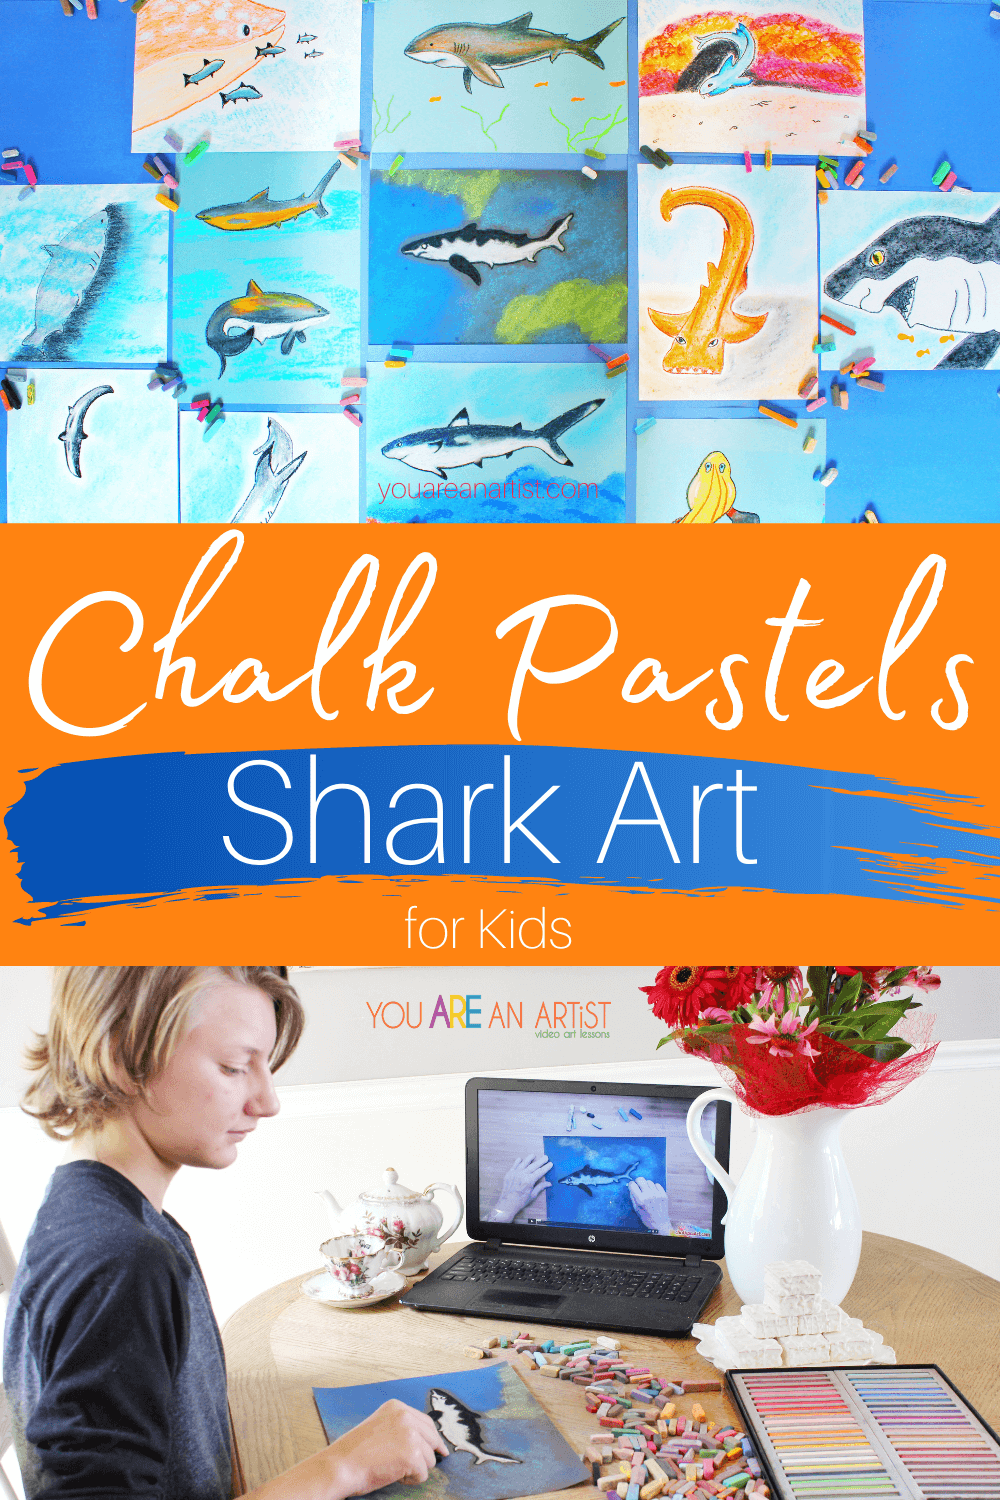 Chalk Pastels Shark Art for Kids: Do your kids love sharks? Are you getting ready for shark week? Then let Nana take you under the sea with chalk pastels shark art for kids! These easy lessons will teach you and your child how to draw some of the most interesting sharks using chalk pastels. #YouAREAnArtist #chalkpastels #sharkweek #chalkpastelssharkart #sharkart #sharkartforkids #chalkpastelssharkartforkids #sharkweek #sharks